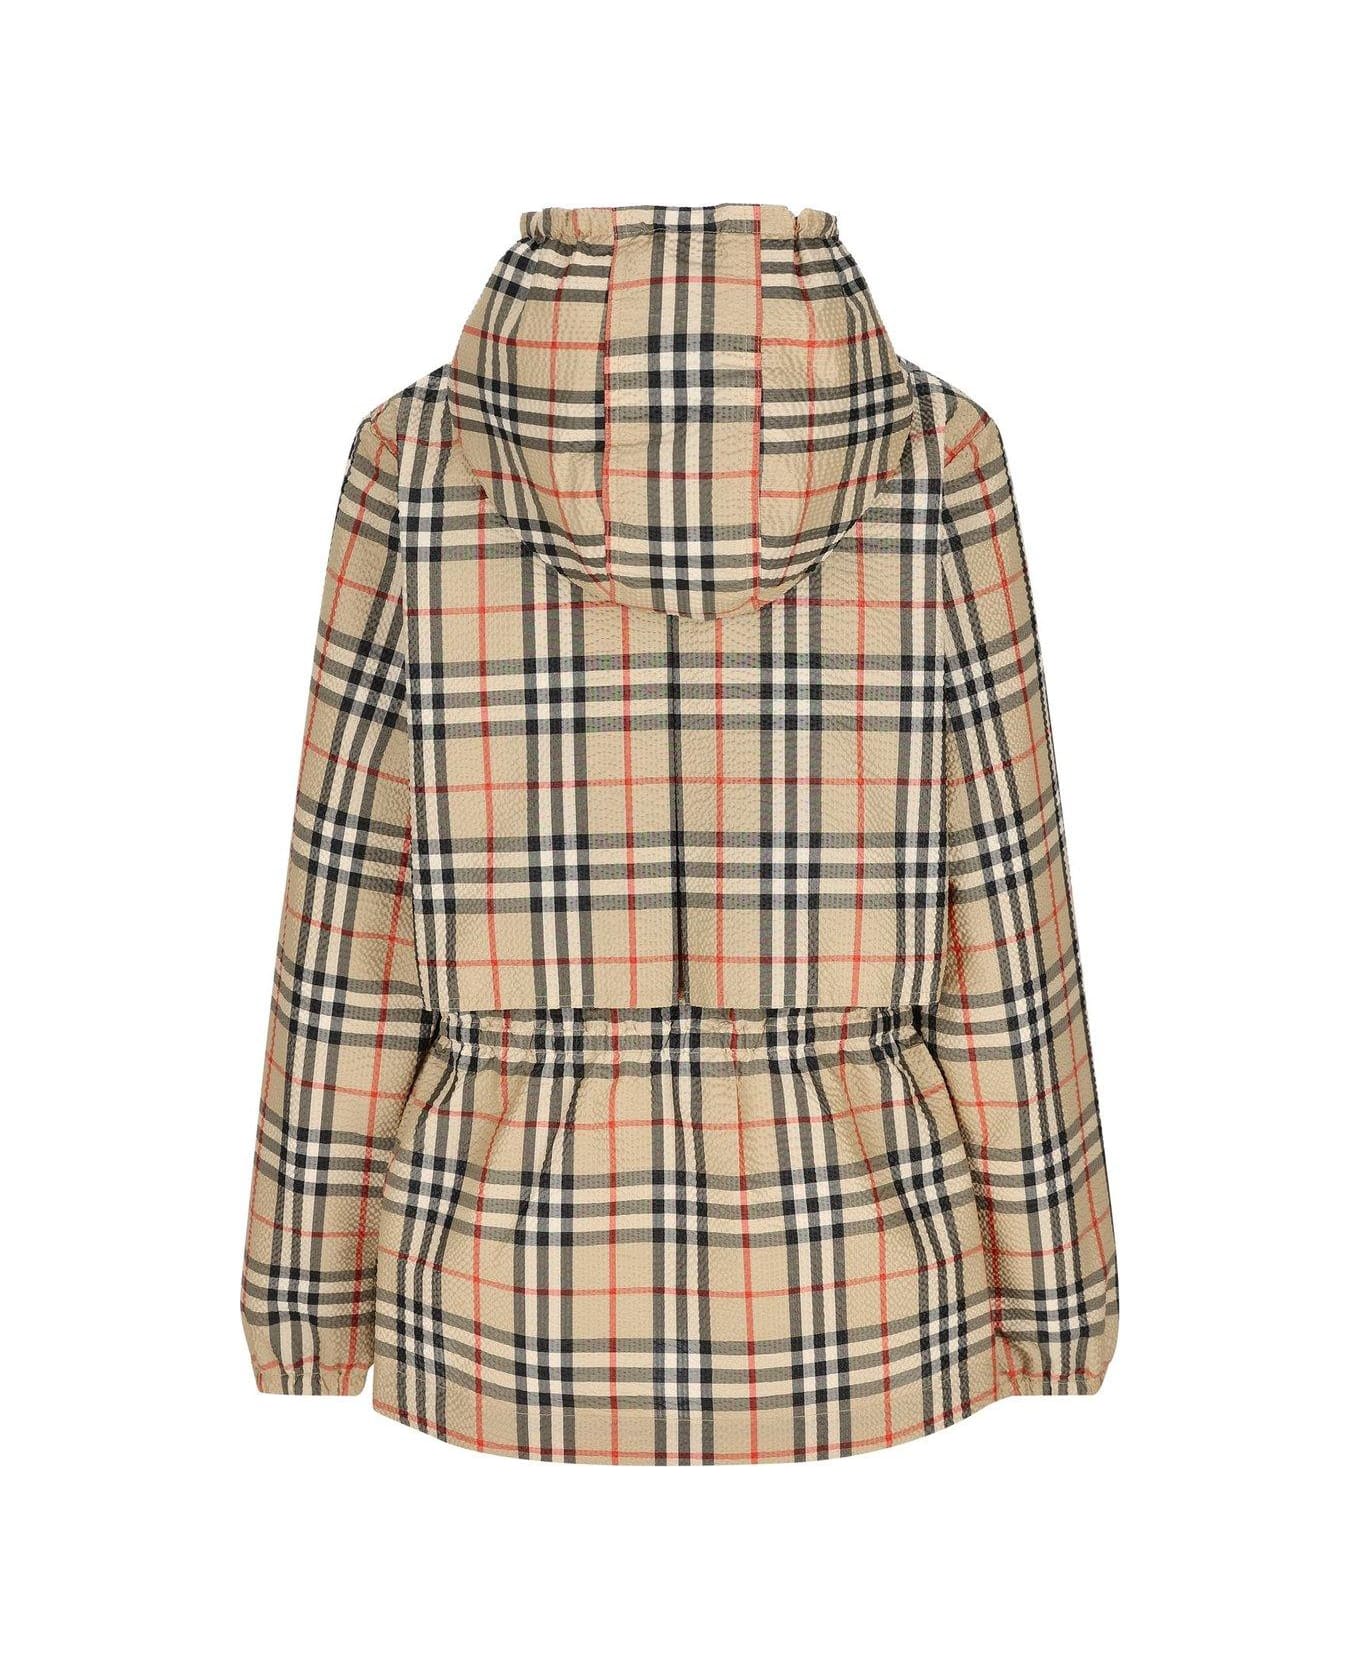 Burberry Vintage Check Hooded Zipped Jacket - Archive beige コート＆ジャケット